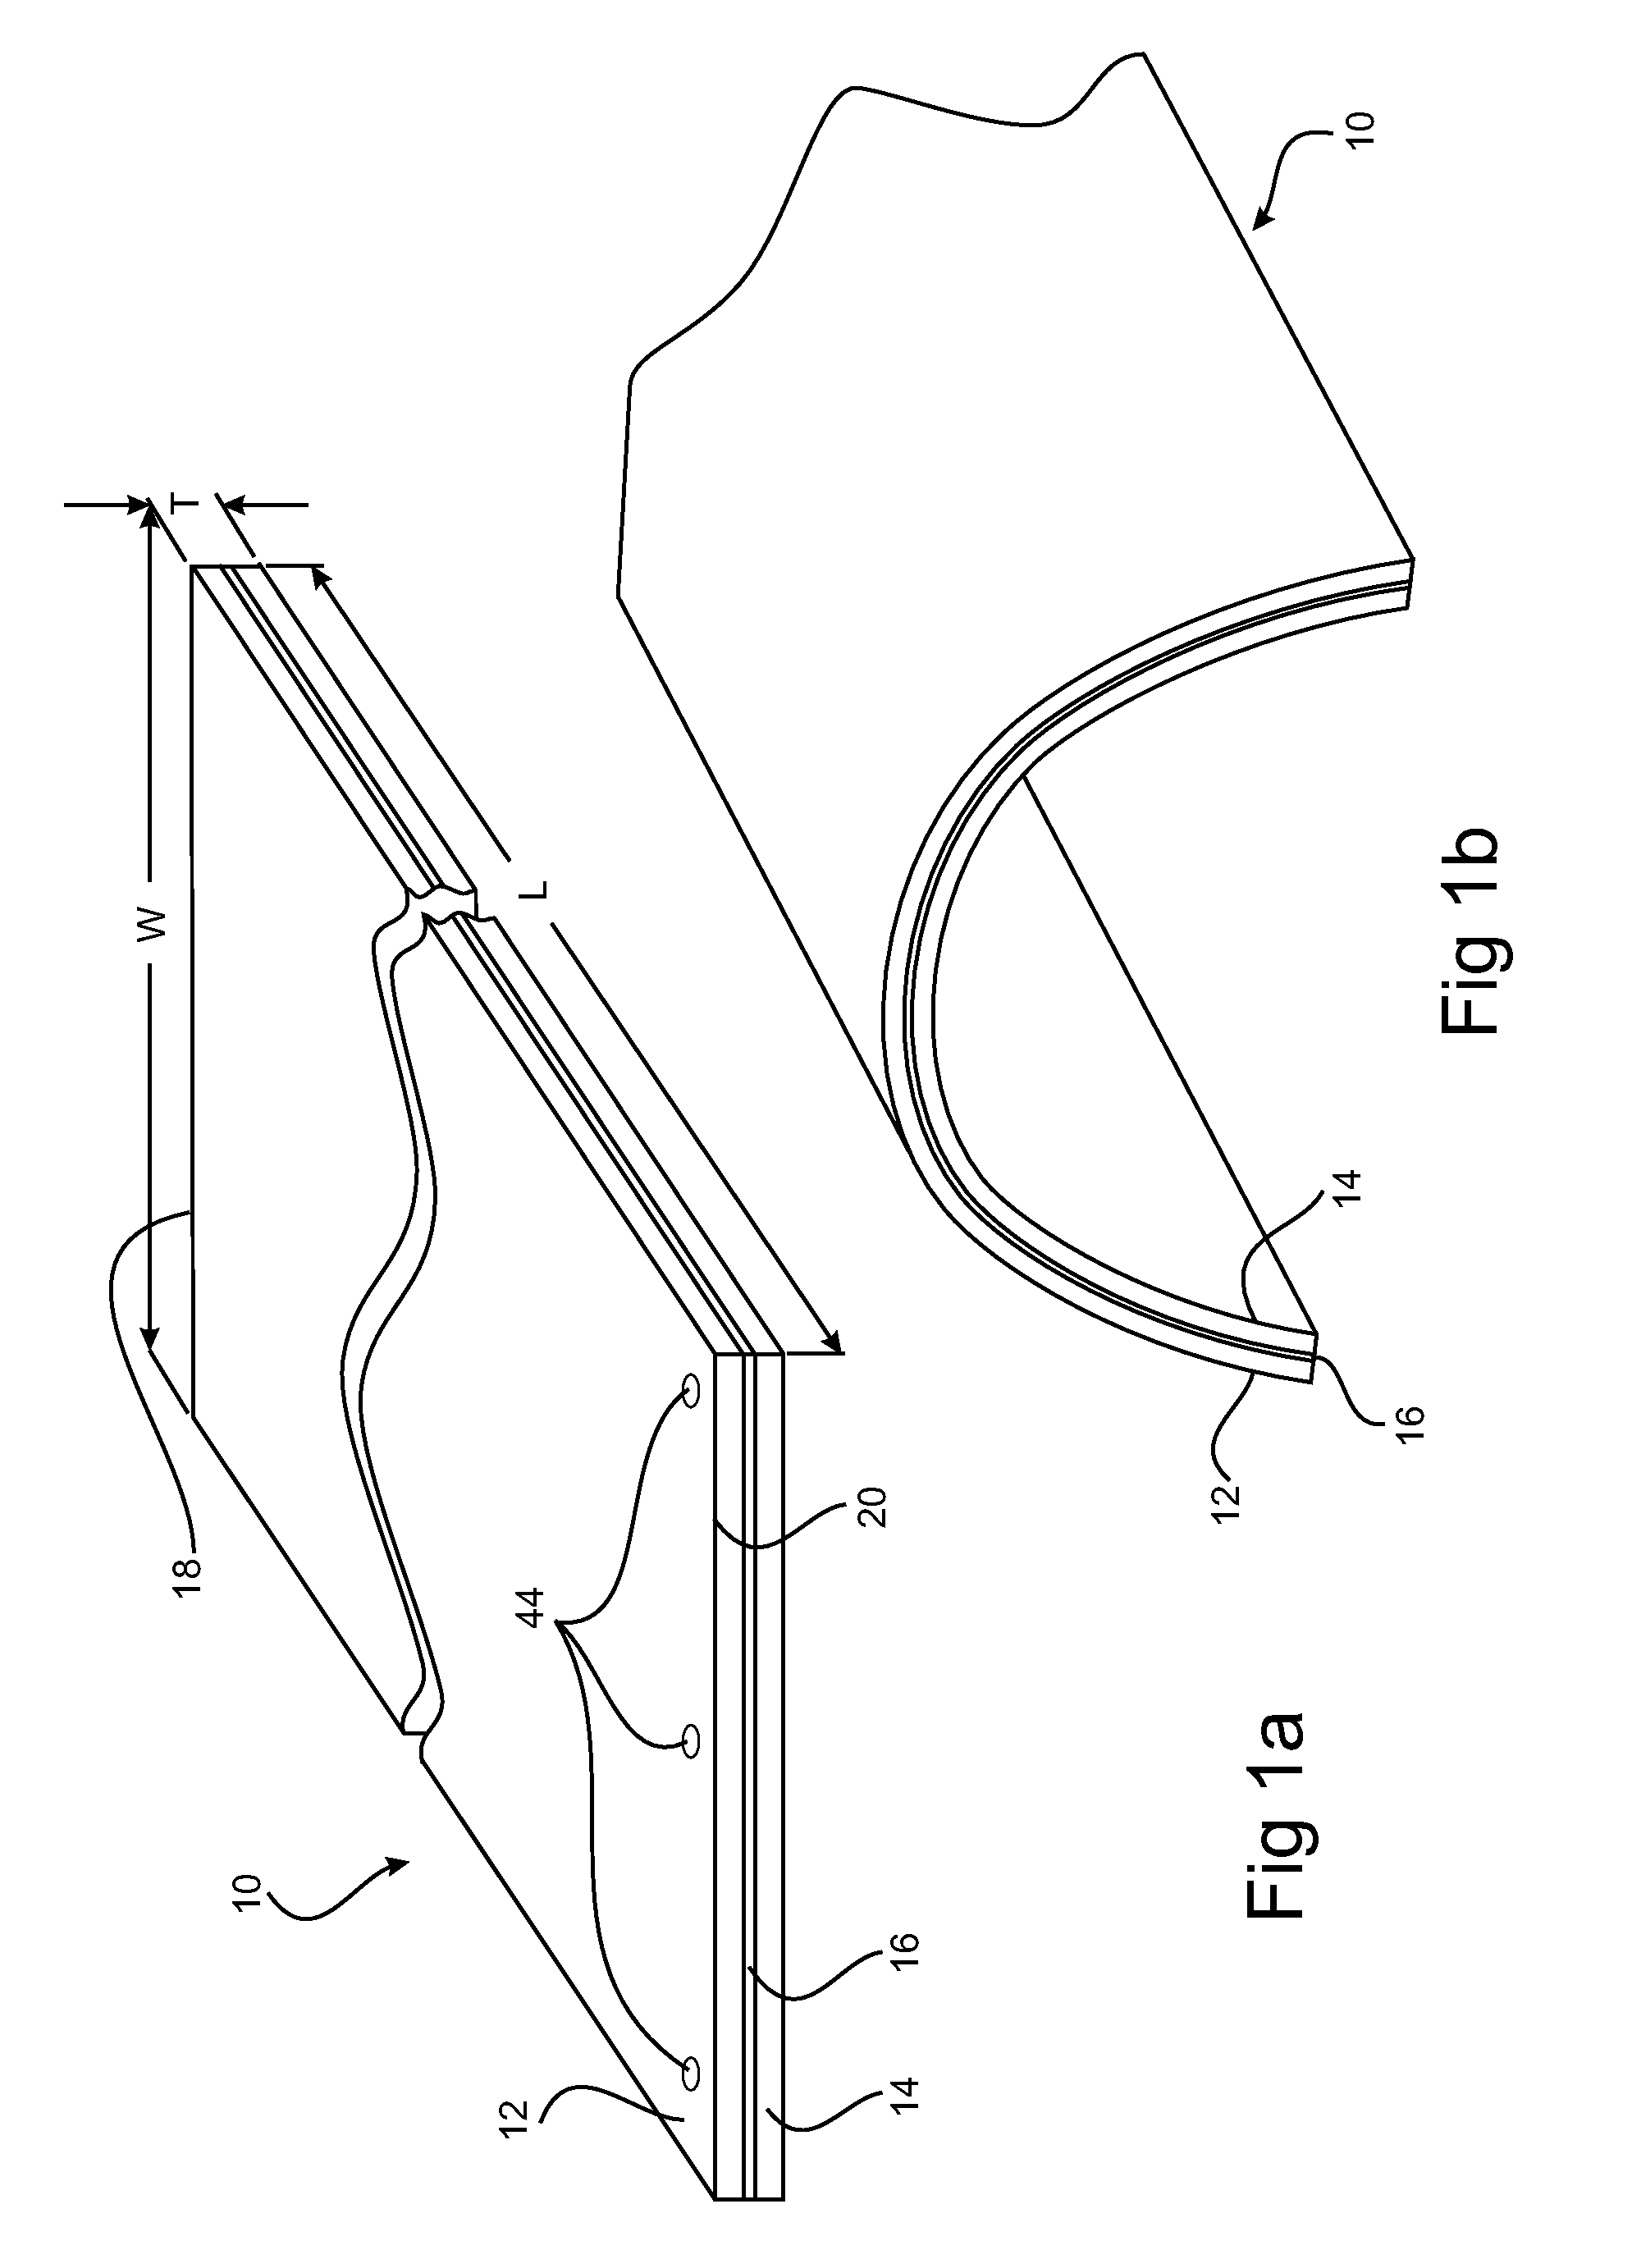 Single Stage Glass Lamination Apparatus and Process